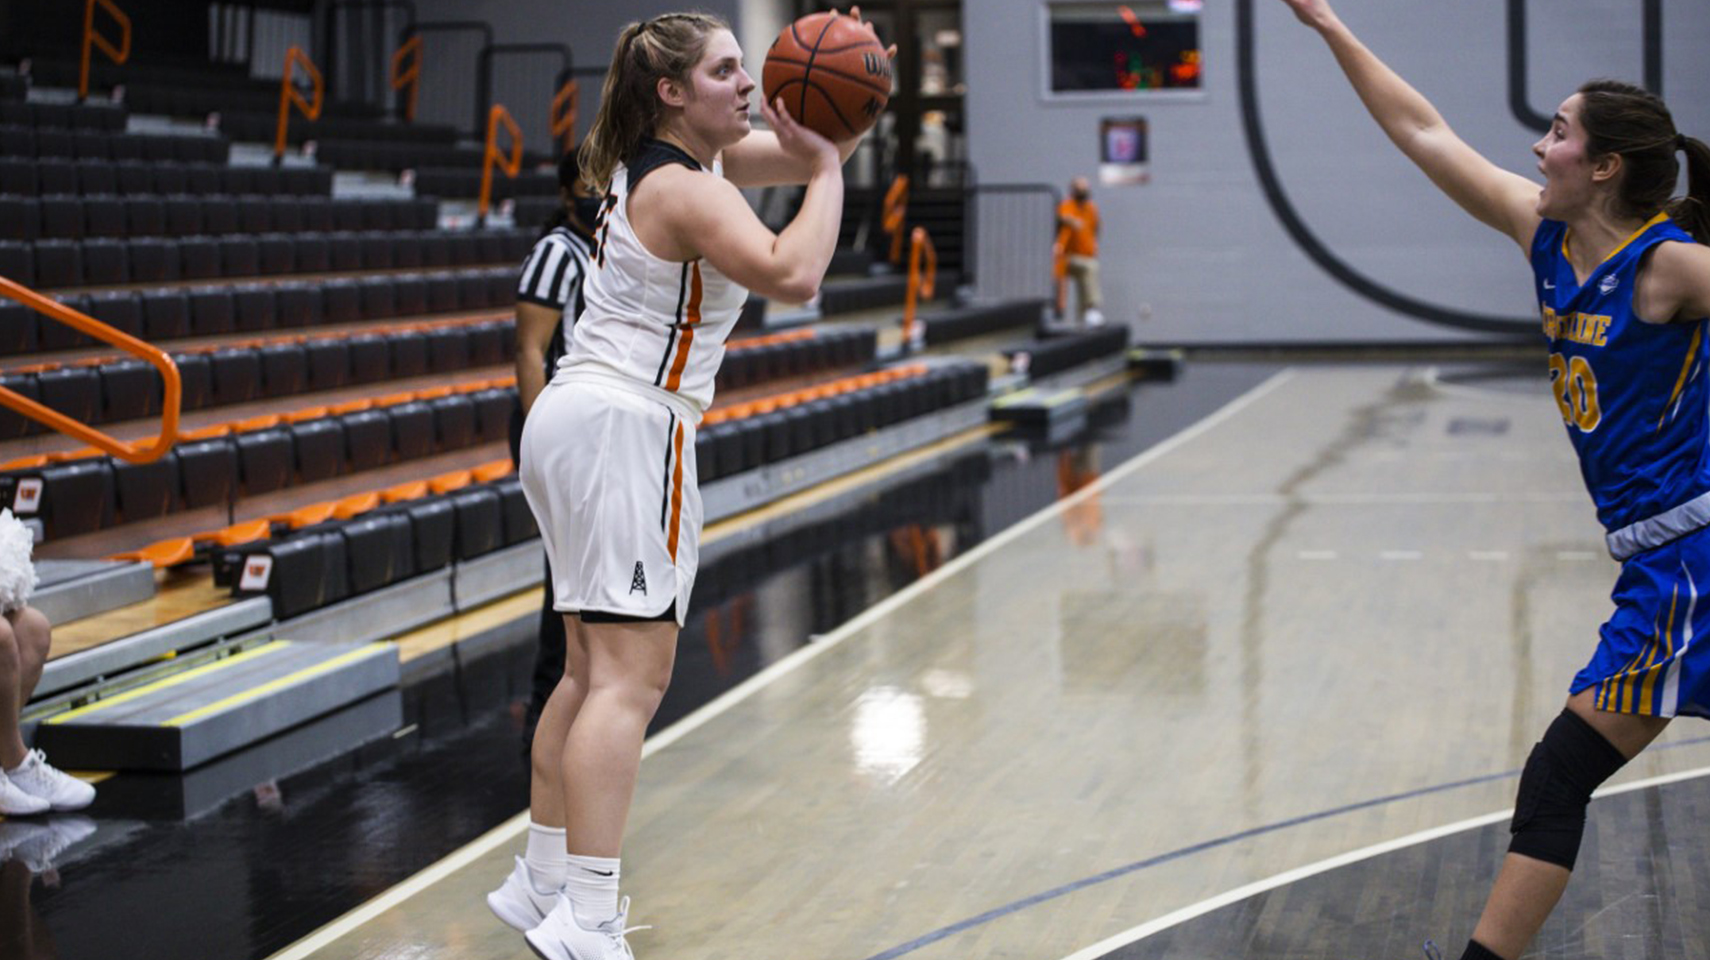 Women's basketball player shooting a three pointer